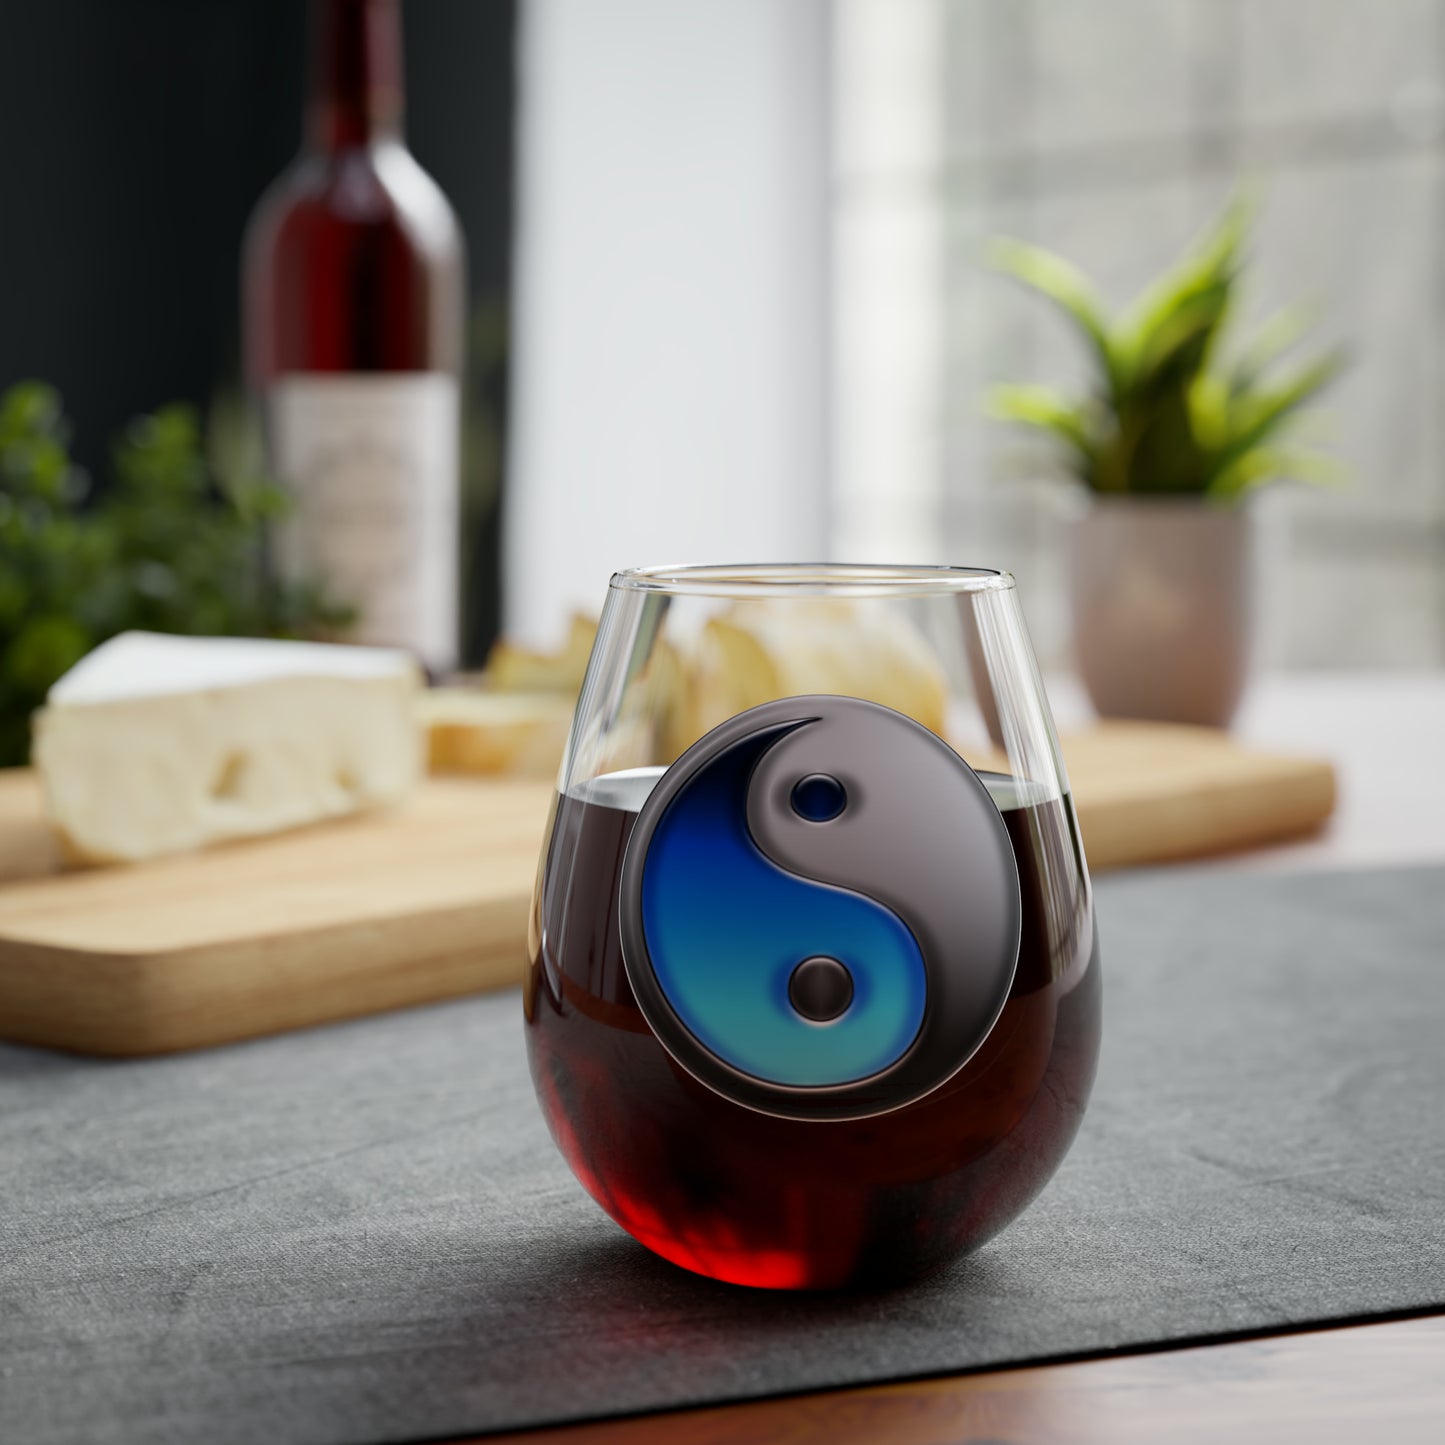 Blue and Silver Ying Yang Stemless Wine Glass, 11.75oz